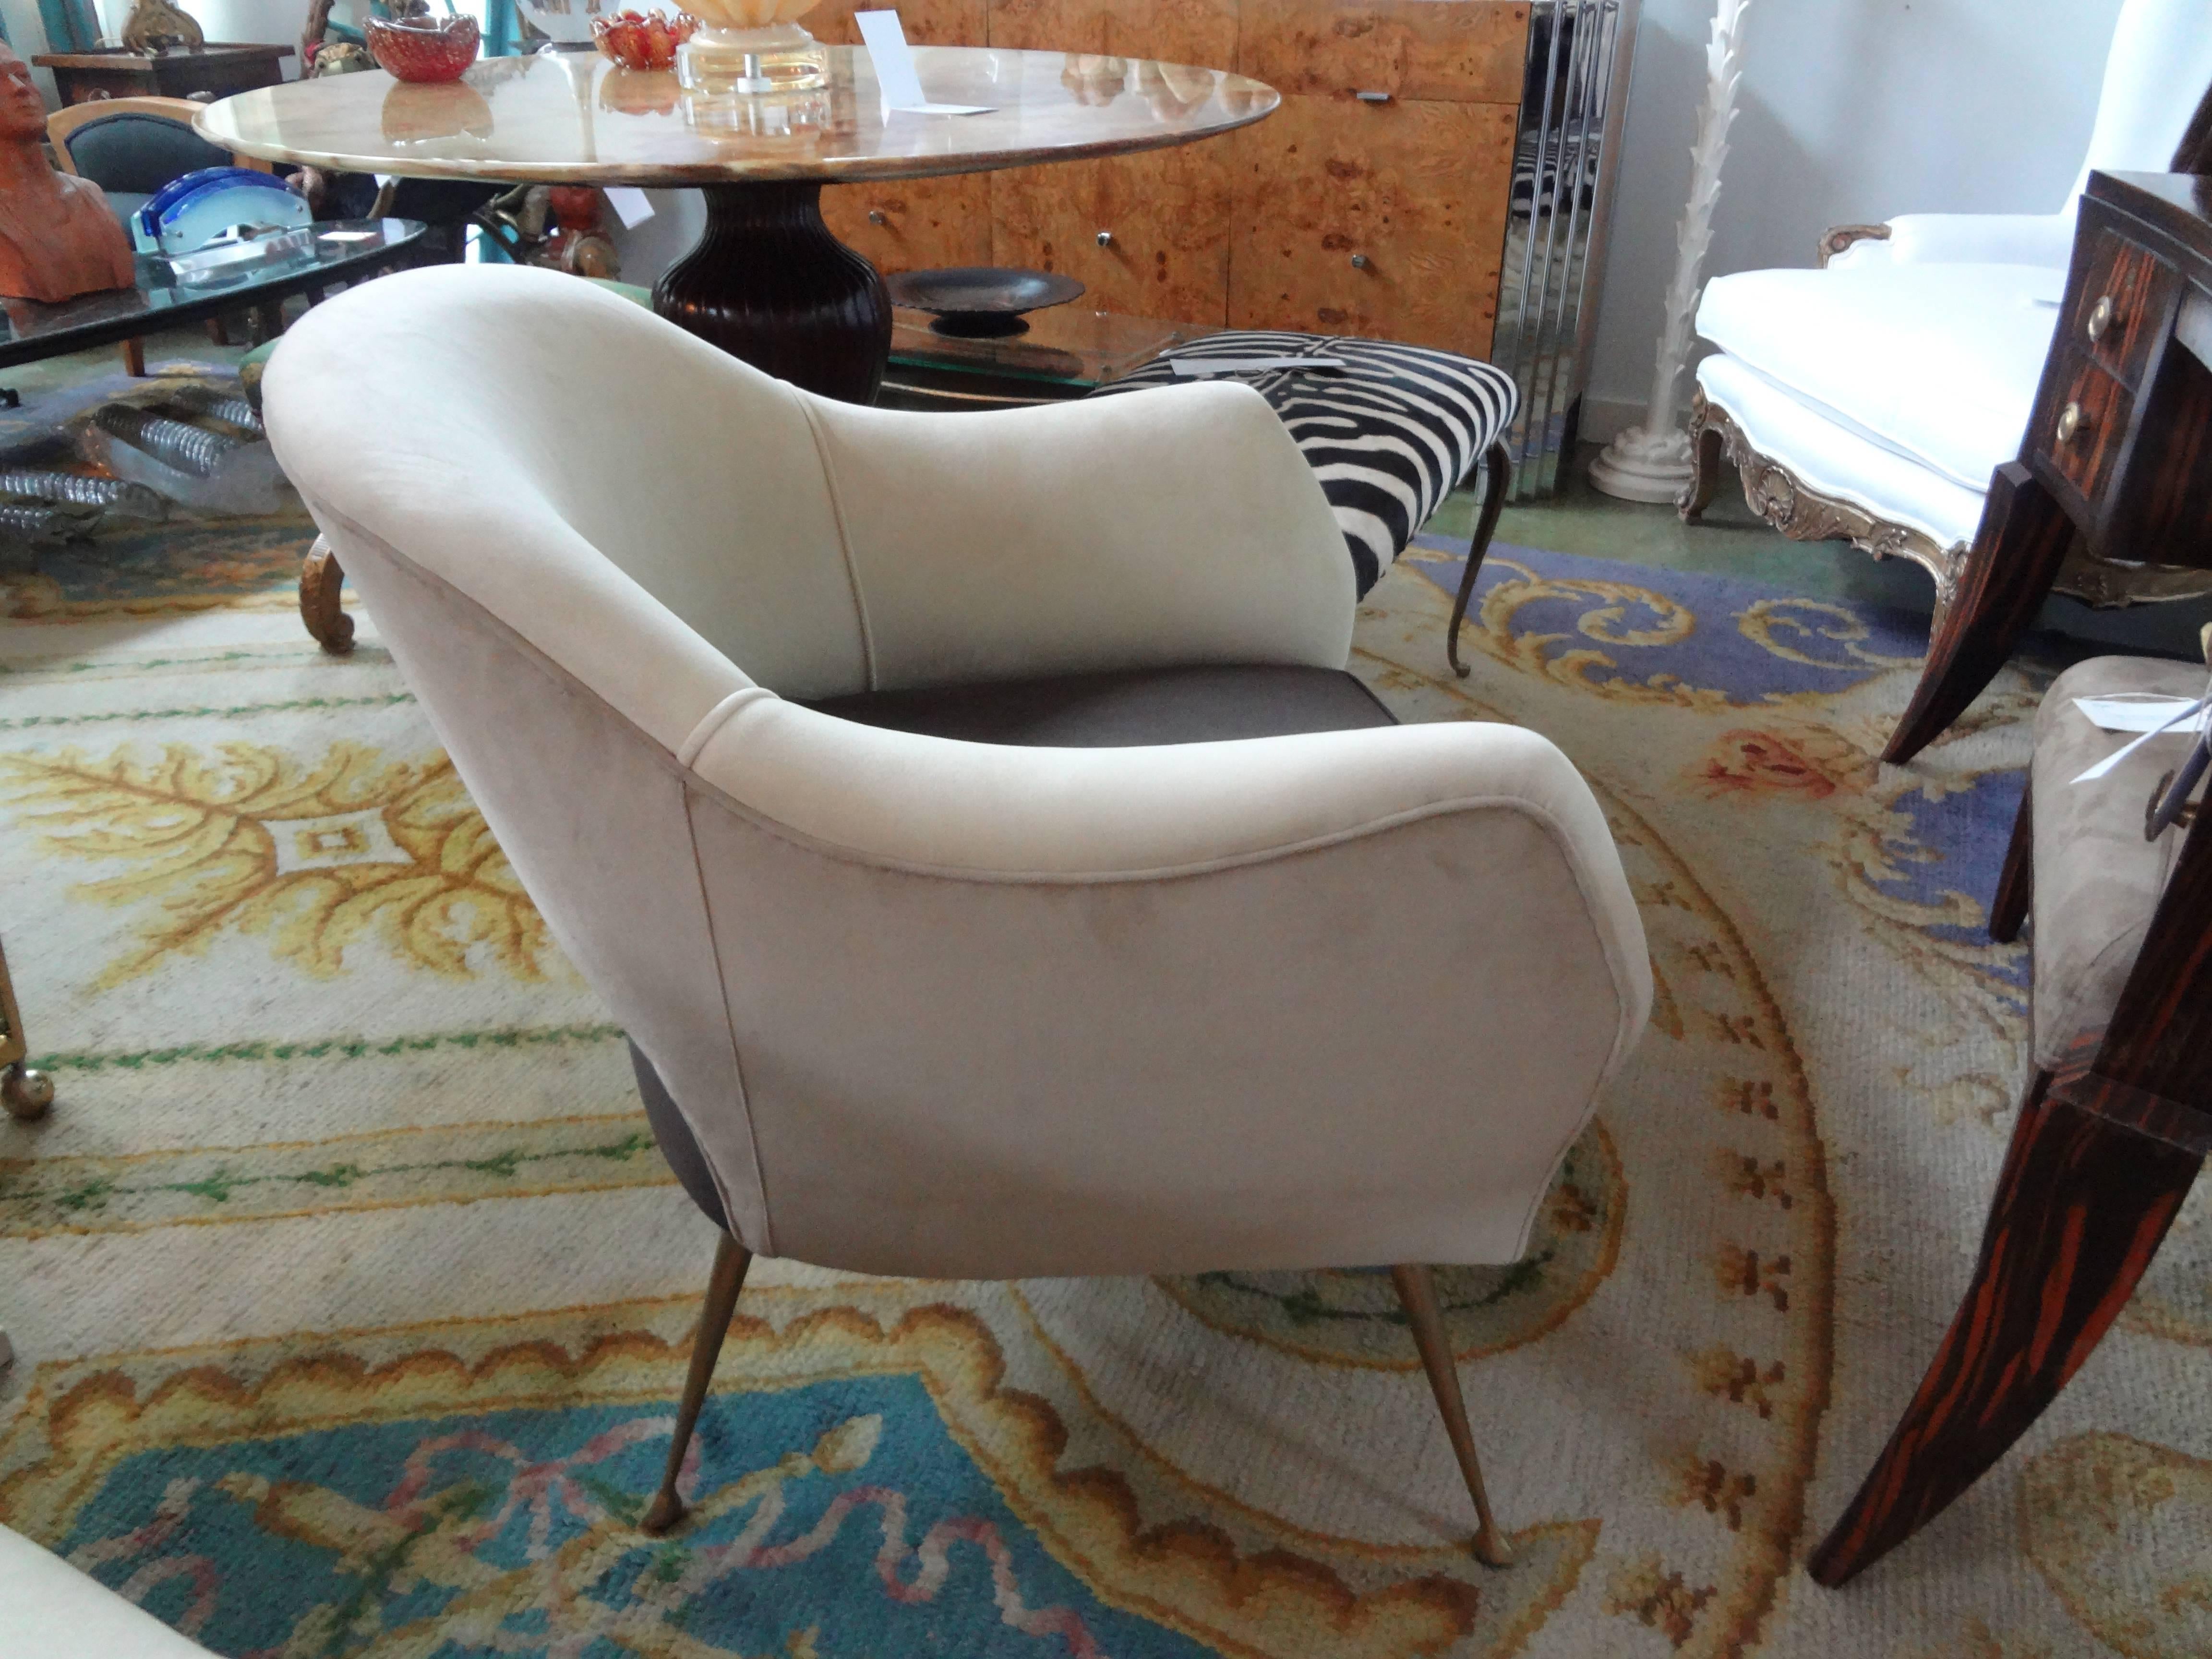 Unusual pair of Italian Mid-Century Modern lounge/club chairs by ISA Bergamo with splayed tapered brass legs and a partial open back. Upholstered in taupe and brown velvet fabric. These chairs offer comfort and style!